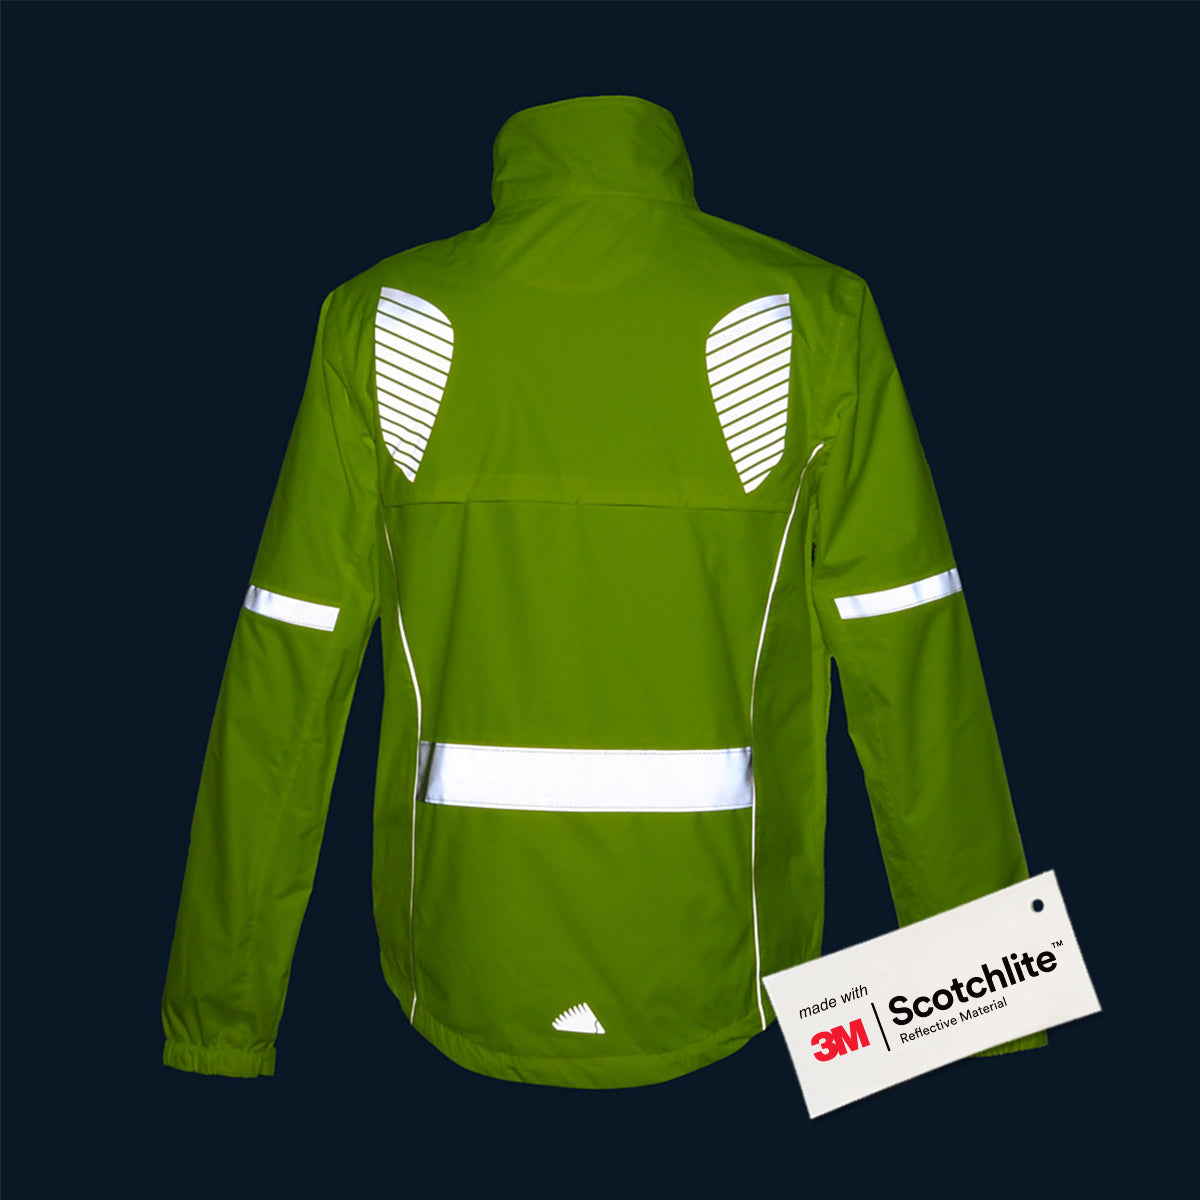 Image of front of cycling jacket in low lighting 